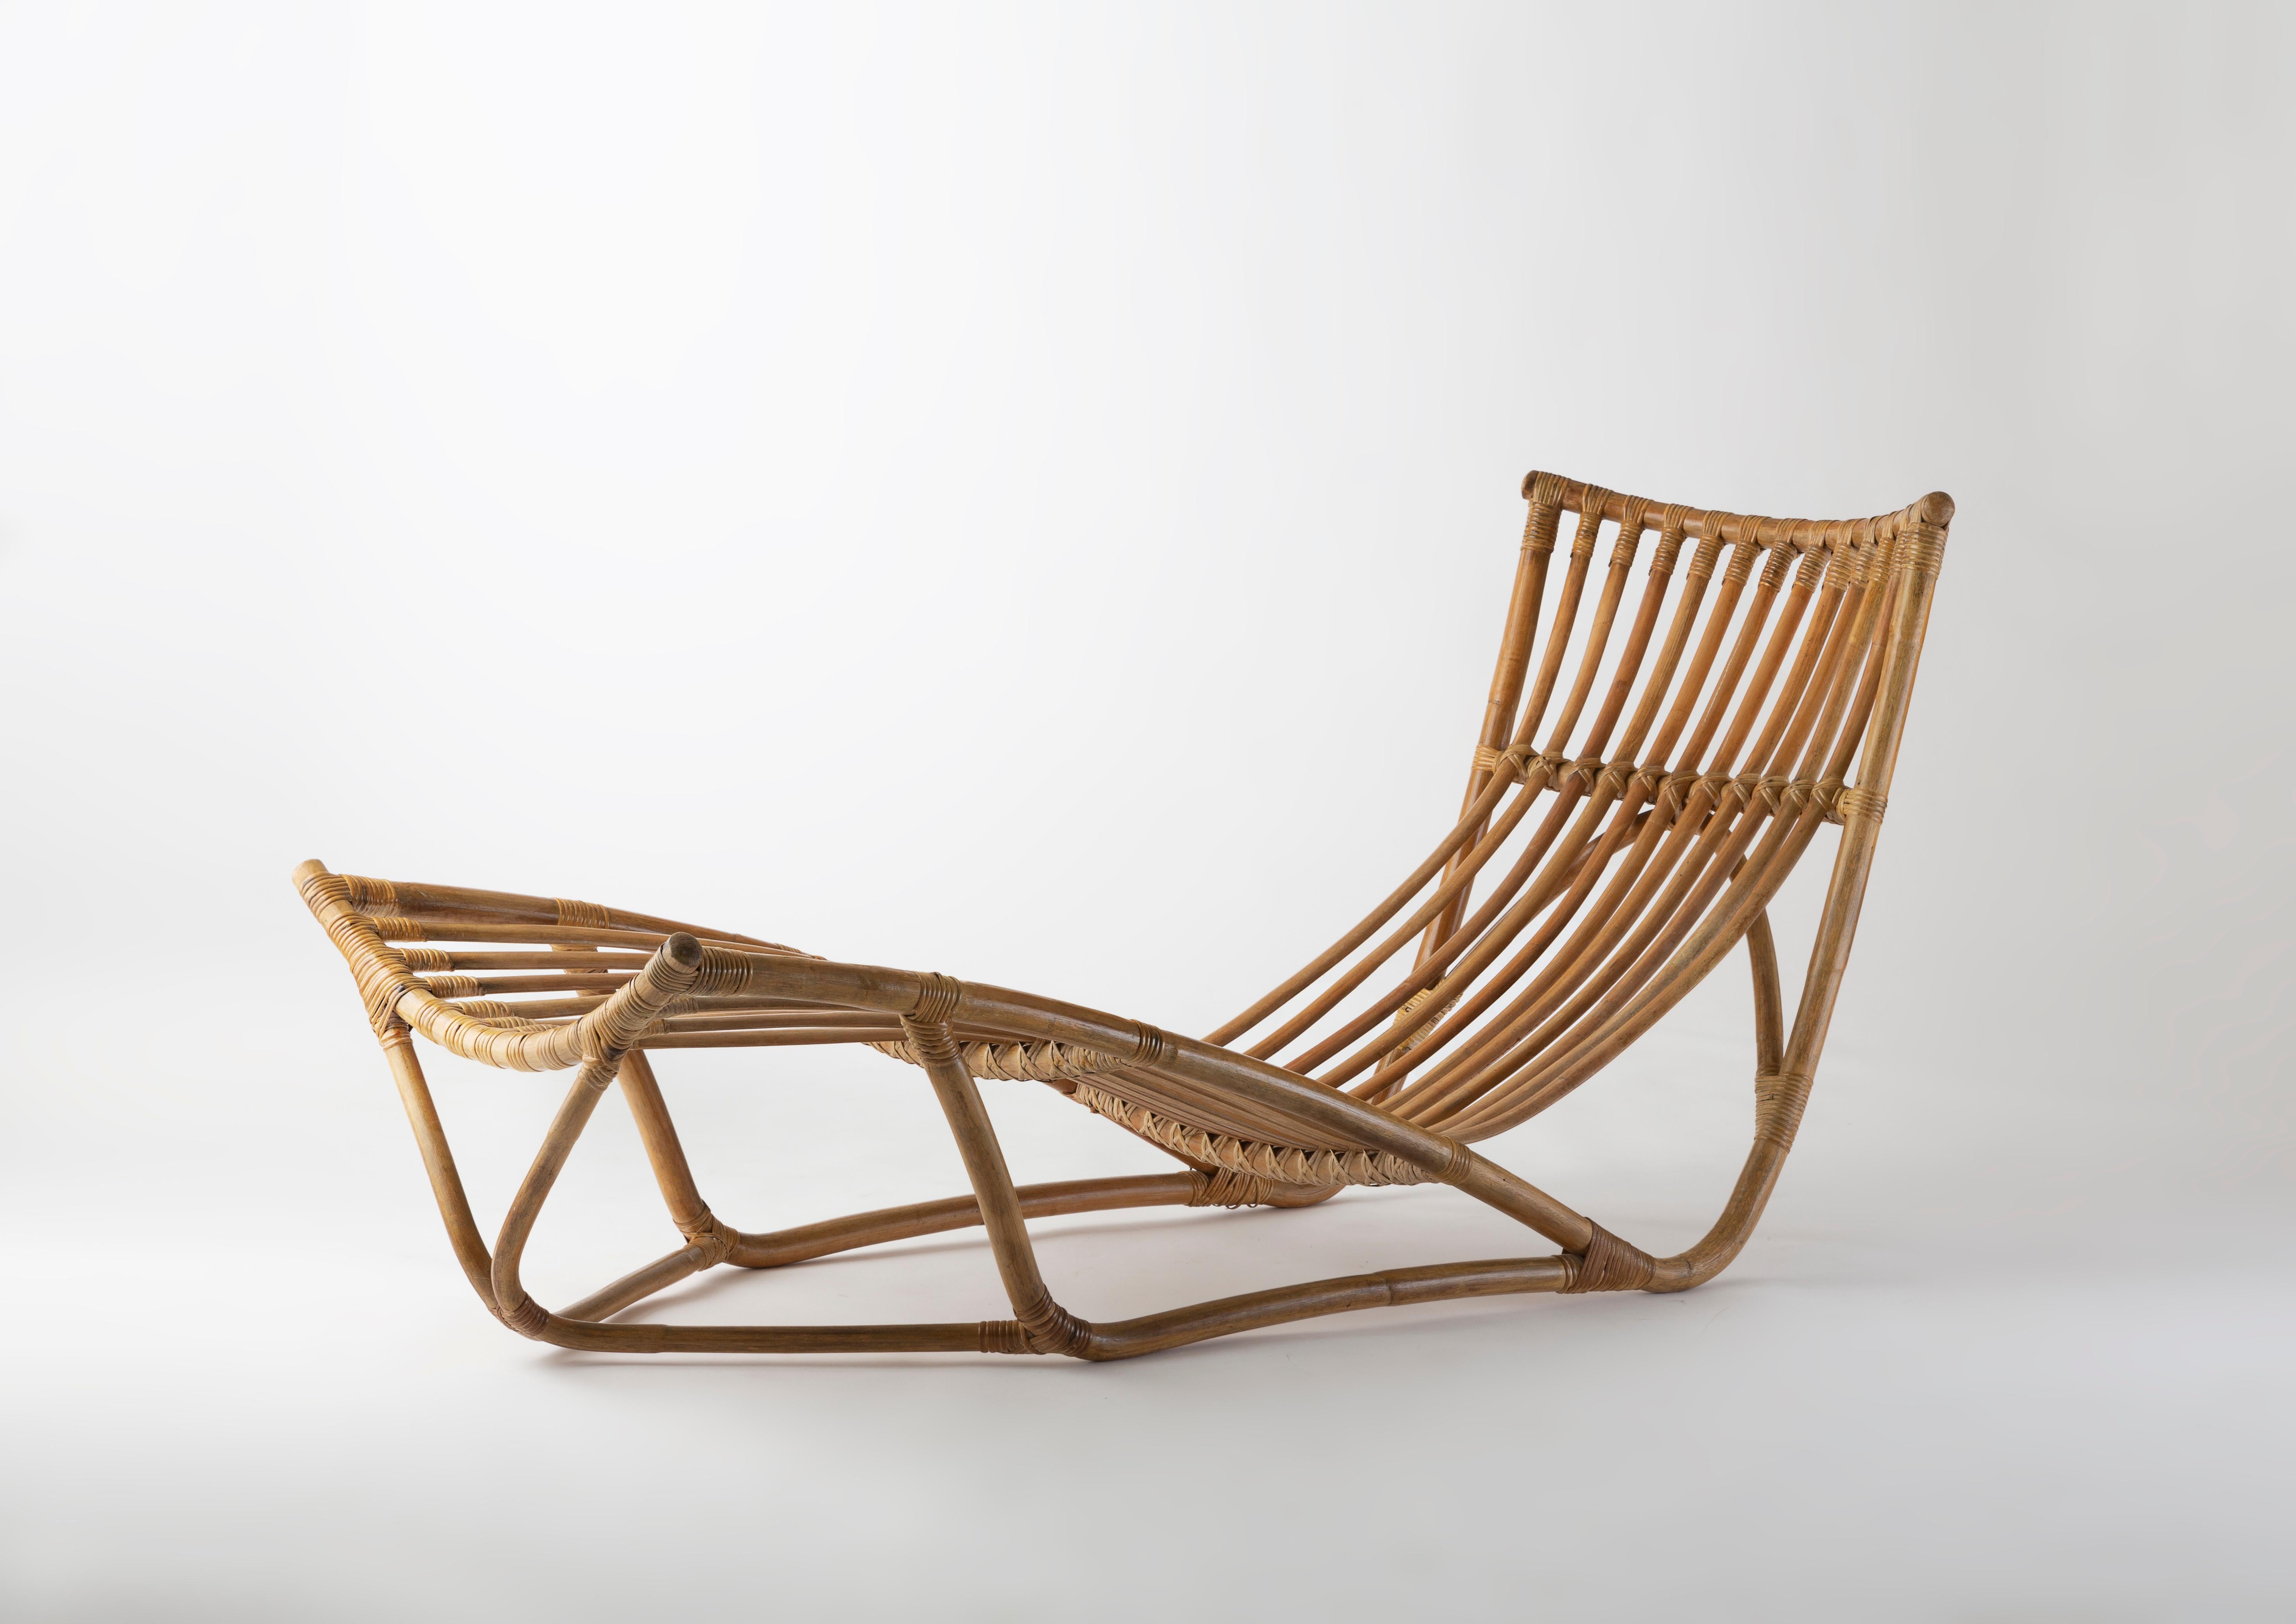 A very rare chaise longue by Yuzuru Yamakawa, one of founder's son of Yamakawa Rattan, one of the most important editor in Japan, in bamboo, manufactured by Yamakawa Rattan, Japan, with the editor’s label, circa 1960.